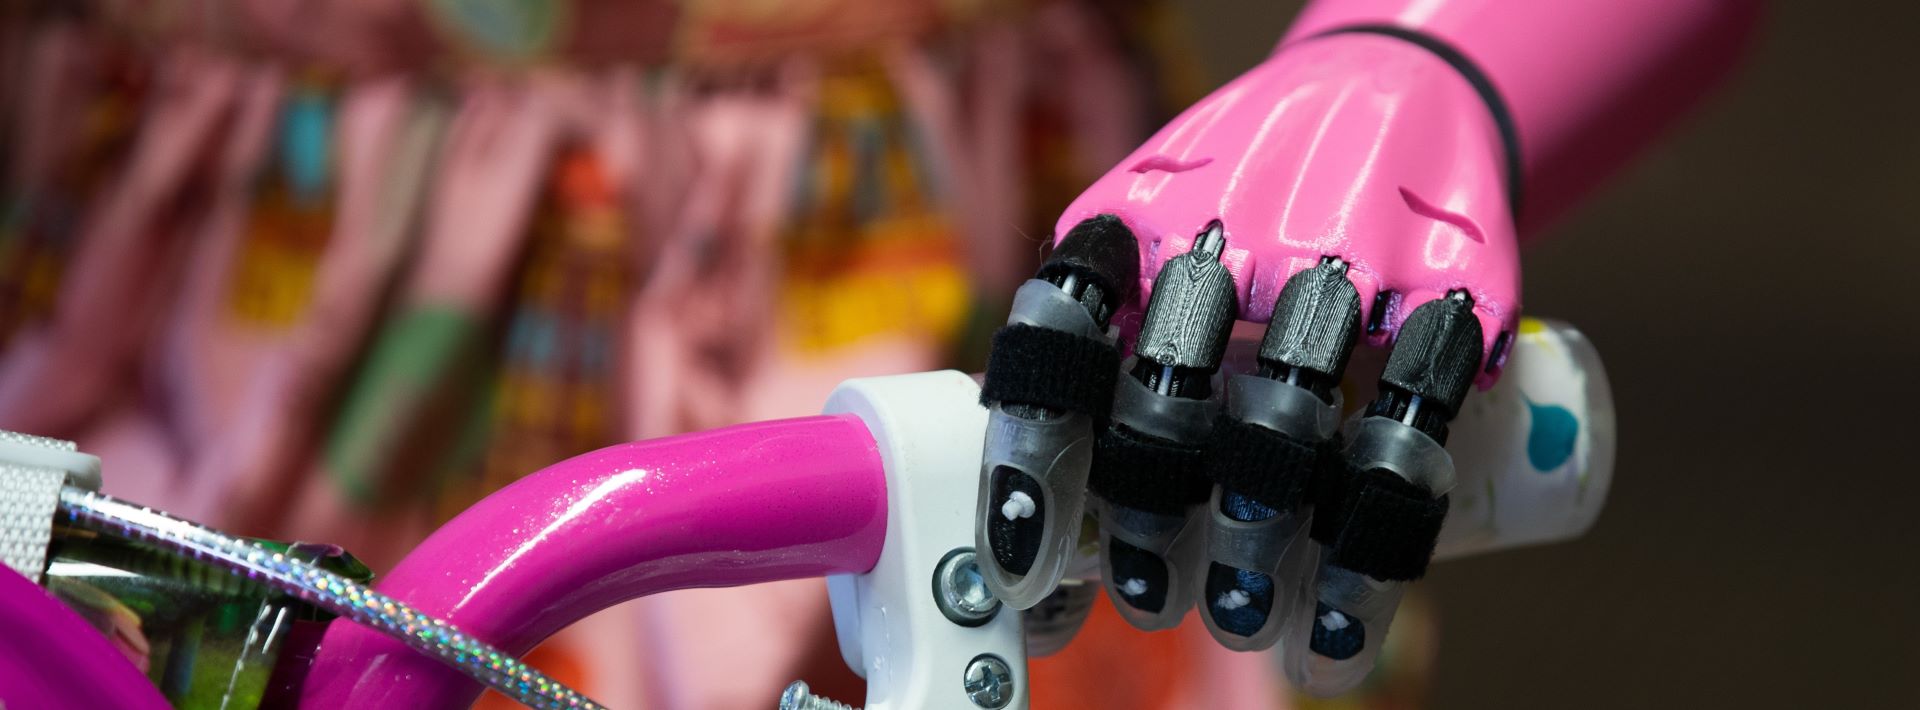 This image shows a close-up of a prosthetic hand attached to the handlebars of a bicycle. The hand has a pink color theme and is equipped with black straps designed to grip the handlebar securely. The bicycle itself seems to have a pink grip and a patterned bell, suggesting a playful or child-friendly design. The focus on the mechanical hand and its integration with the bicycle highlights an assistive technology for bike riding.